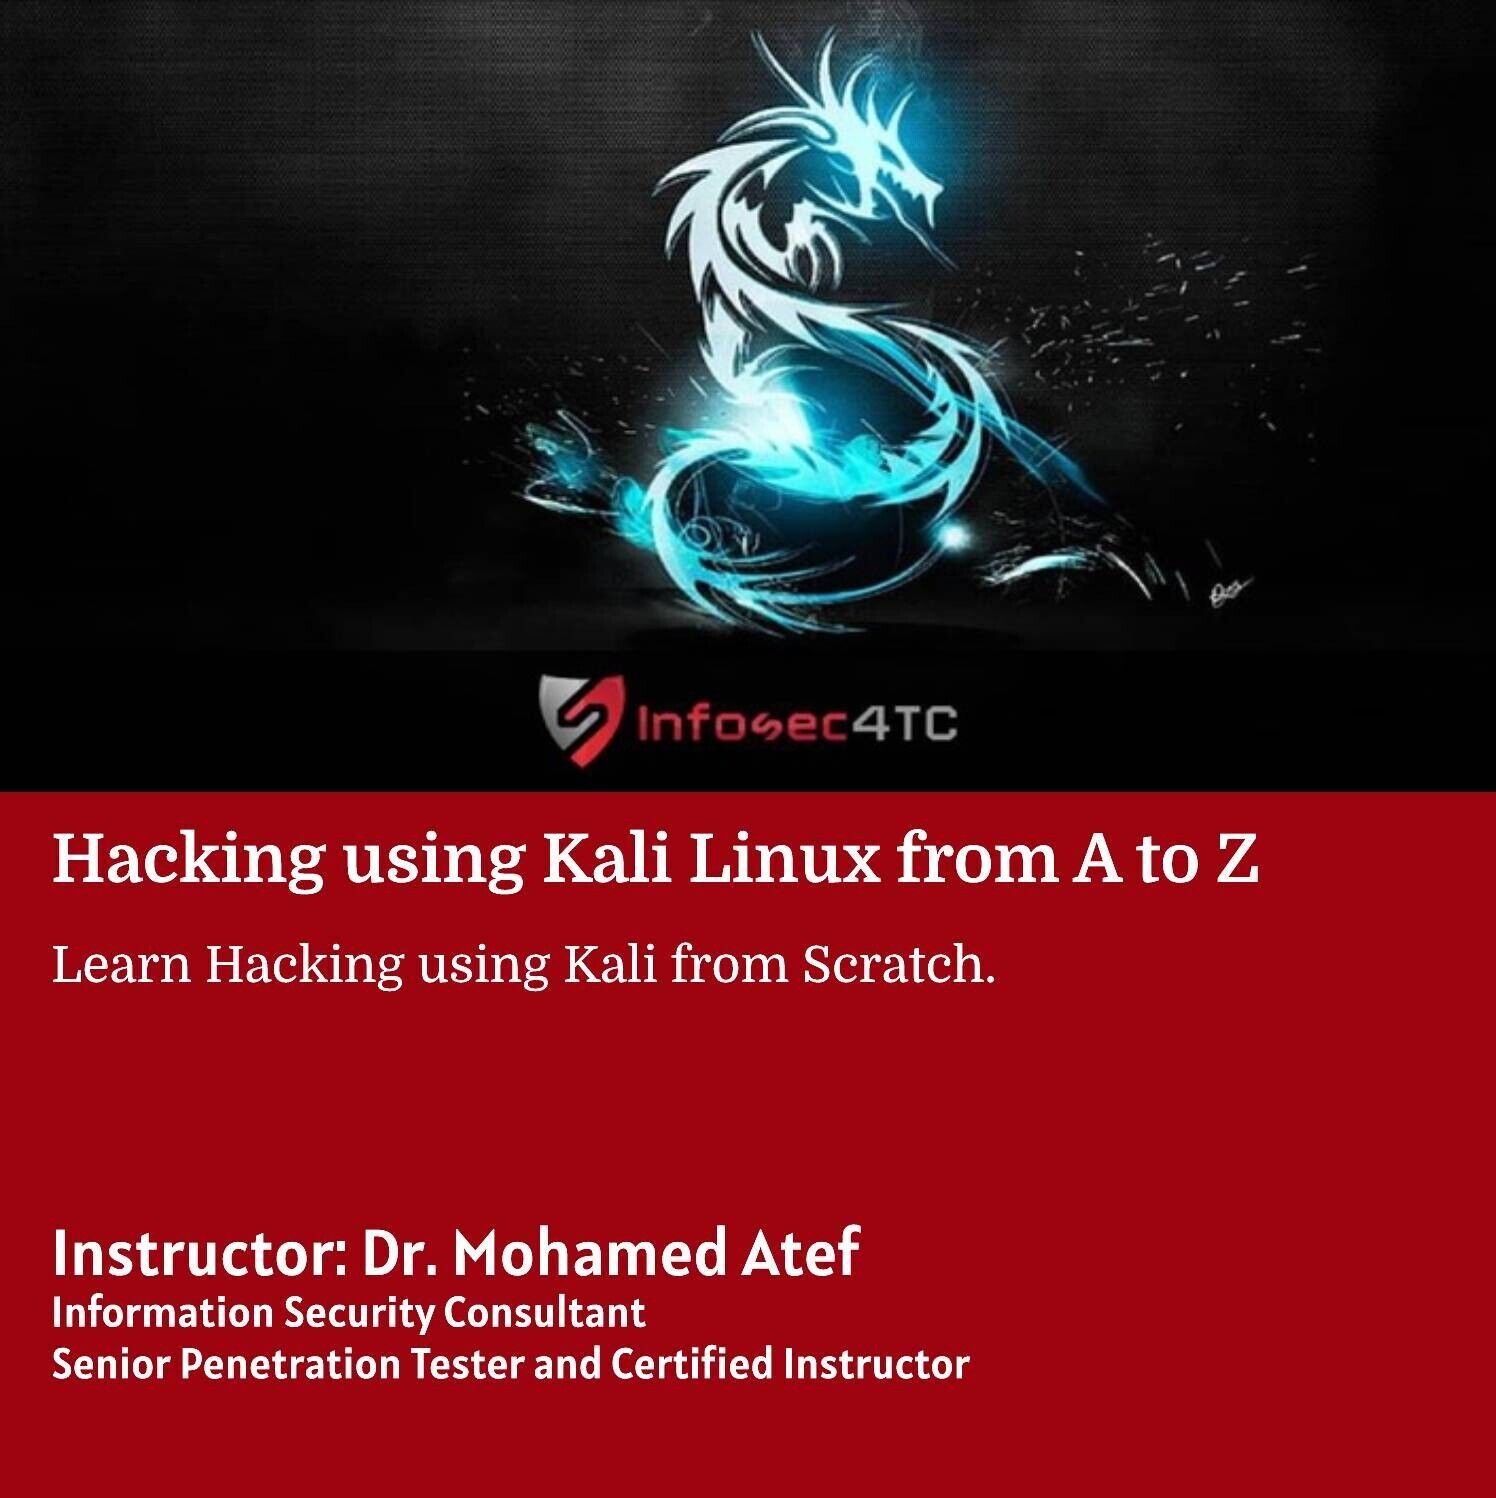 Ethical Hacking using Kali Linux from A to Z Course + Free Resources